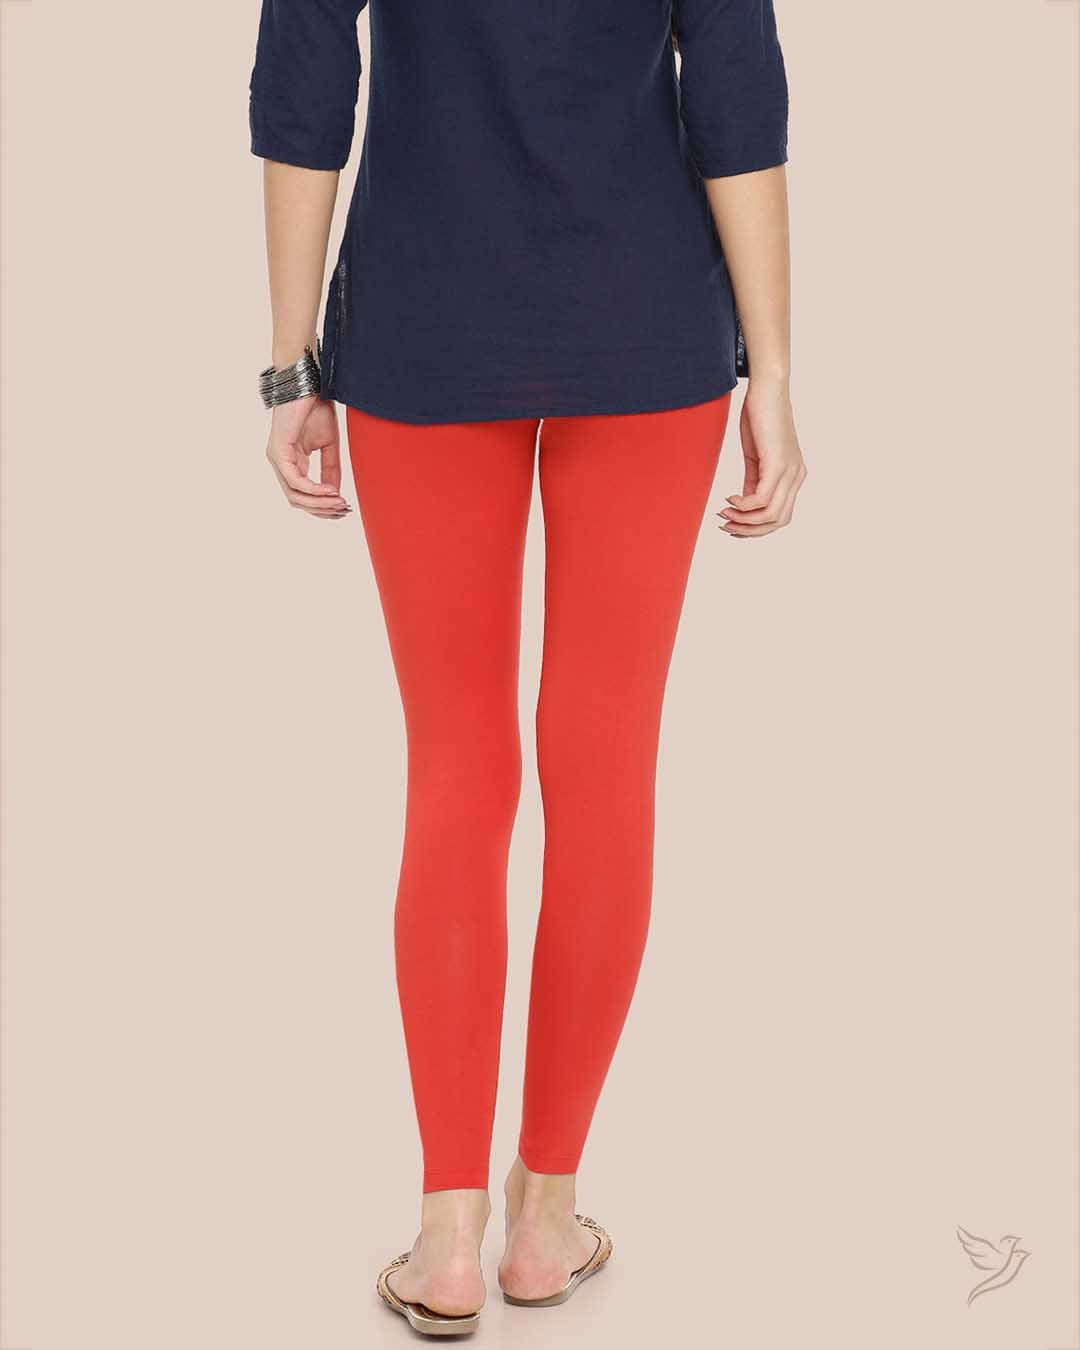 Coral Flame Cotton Ankle Legging for College girls